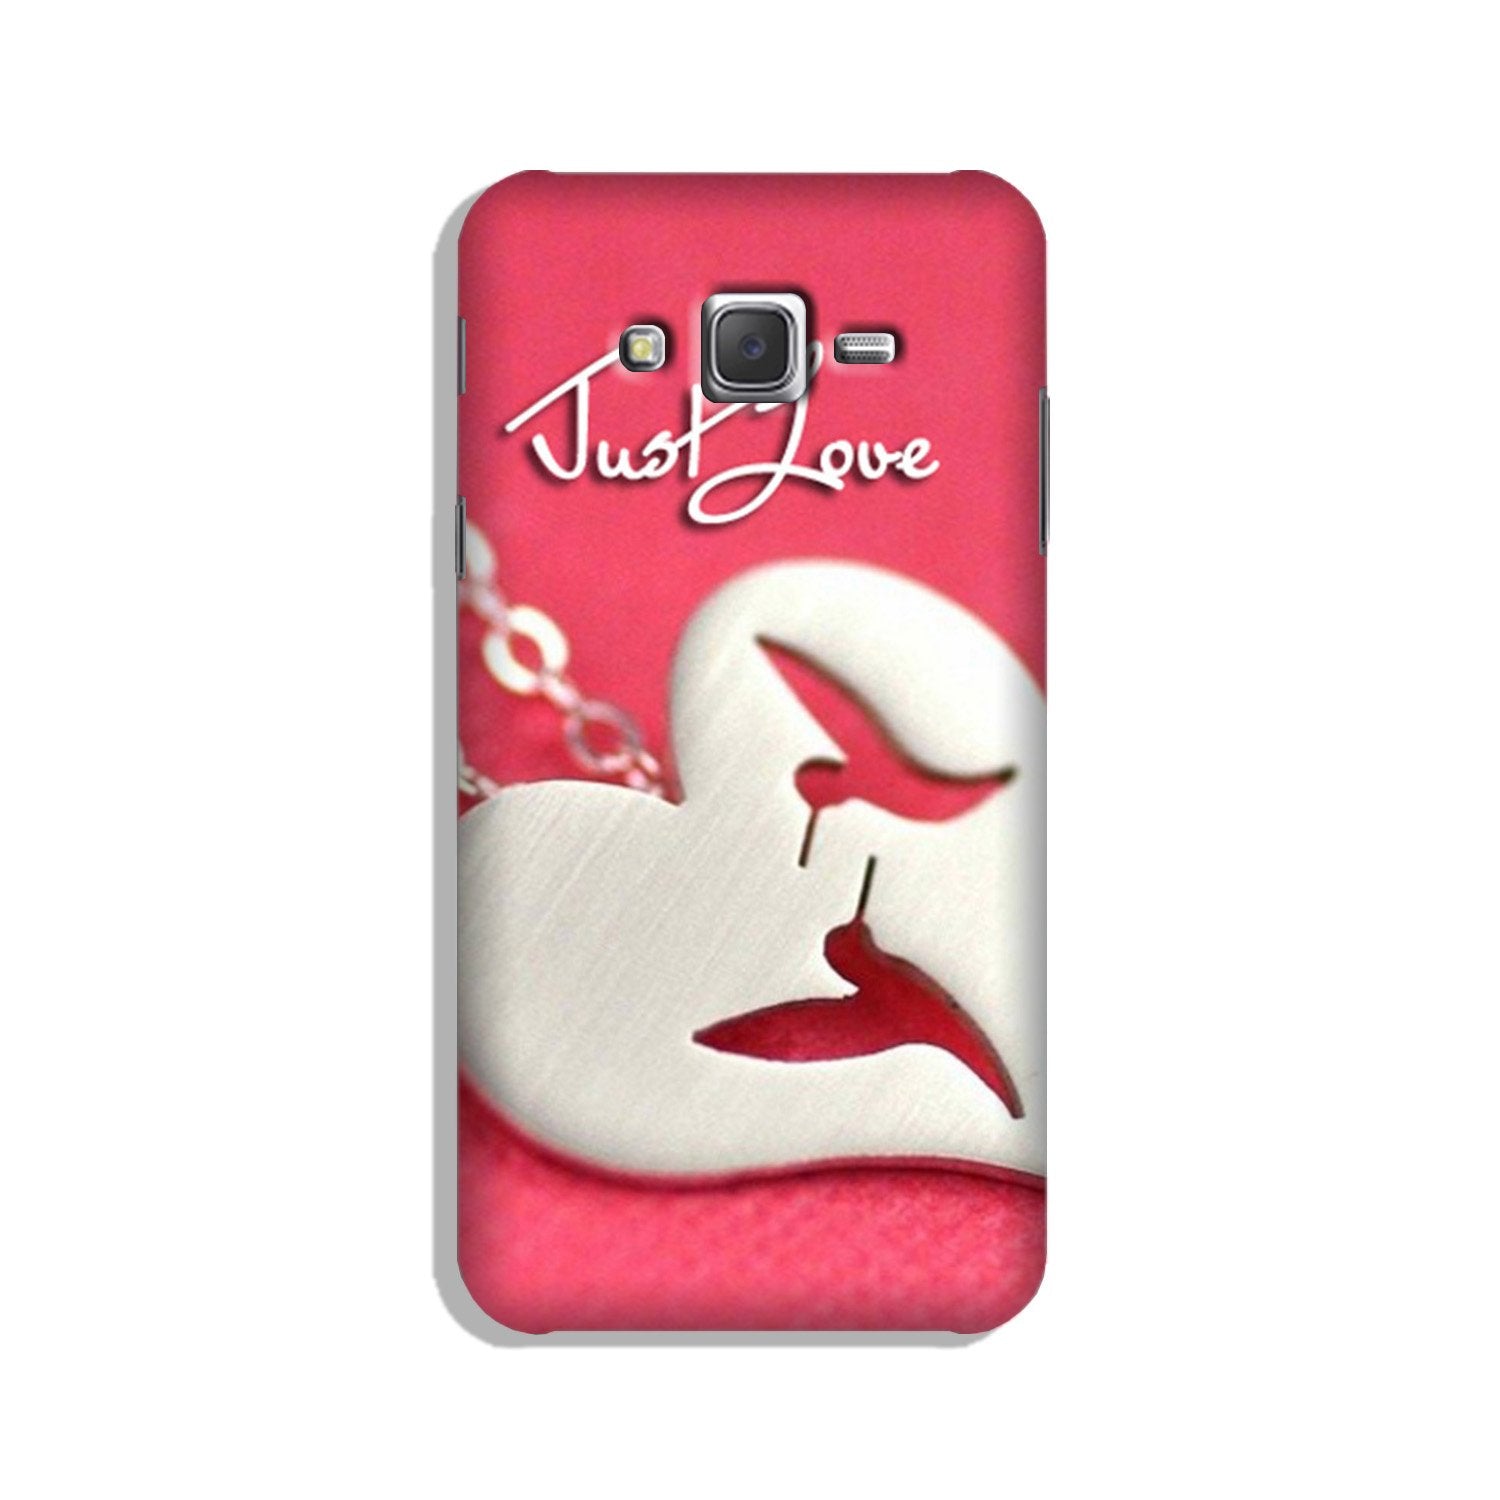 Just love Case for Galaxy J2 (2015)